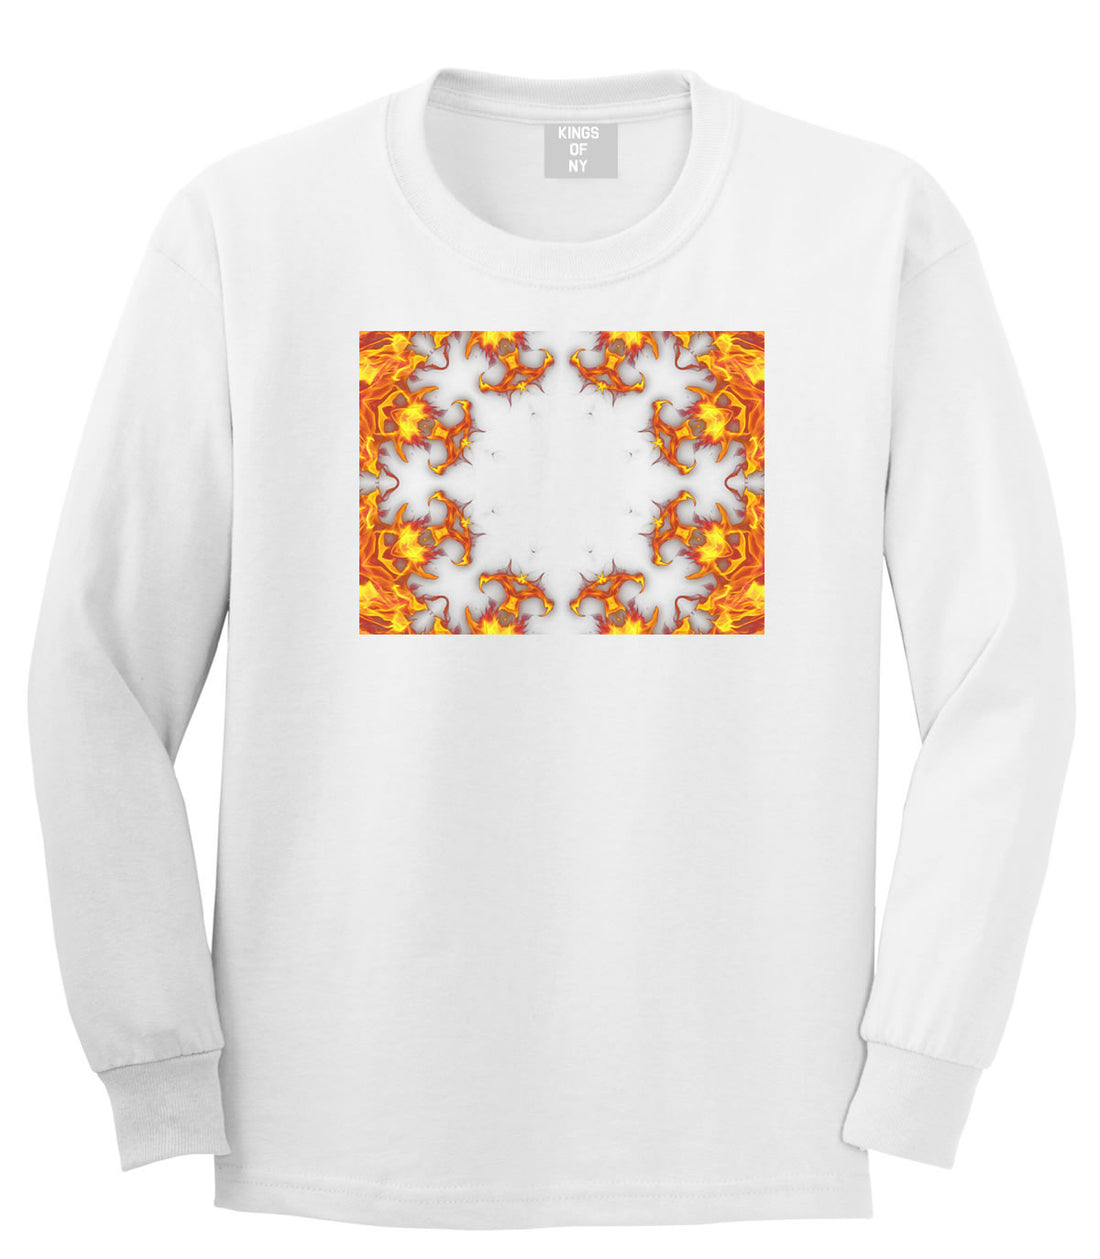 Flames of Fire Gold Frame Long Sleeve T-Shirt in White By Kings Of NY